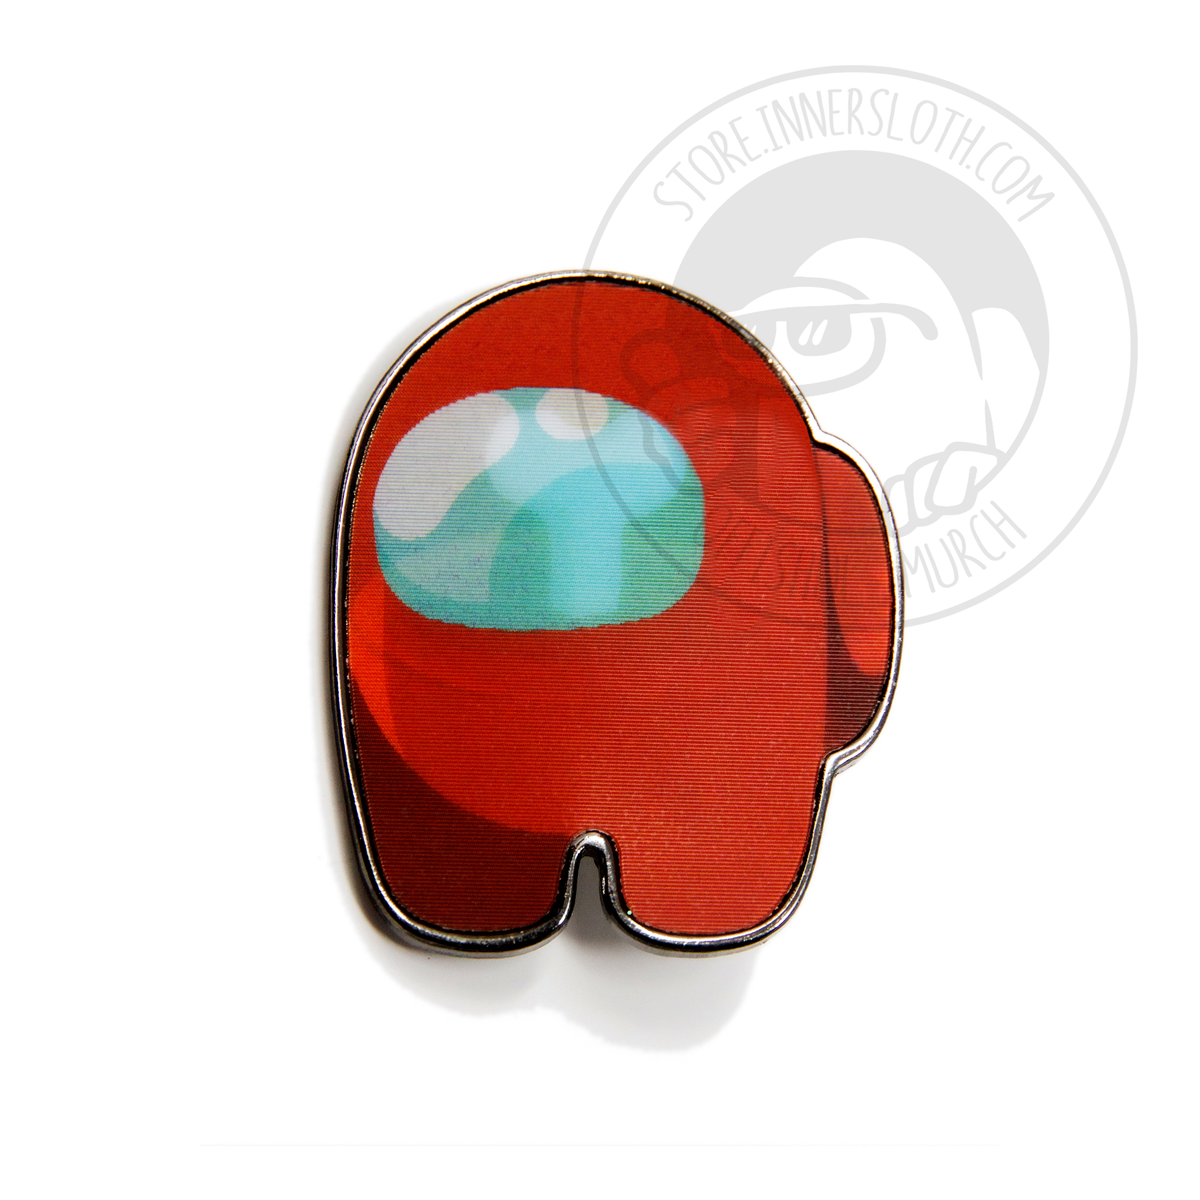 A still image of the Among Us: Lenticular Crewmate Pin in Red.